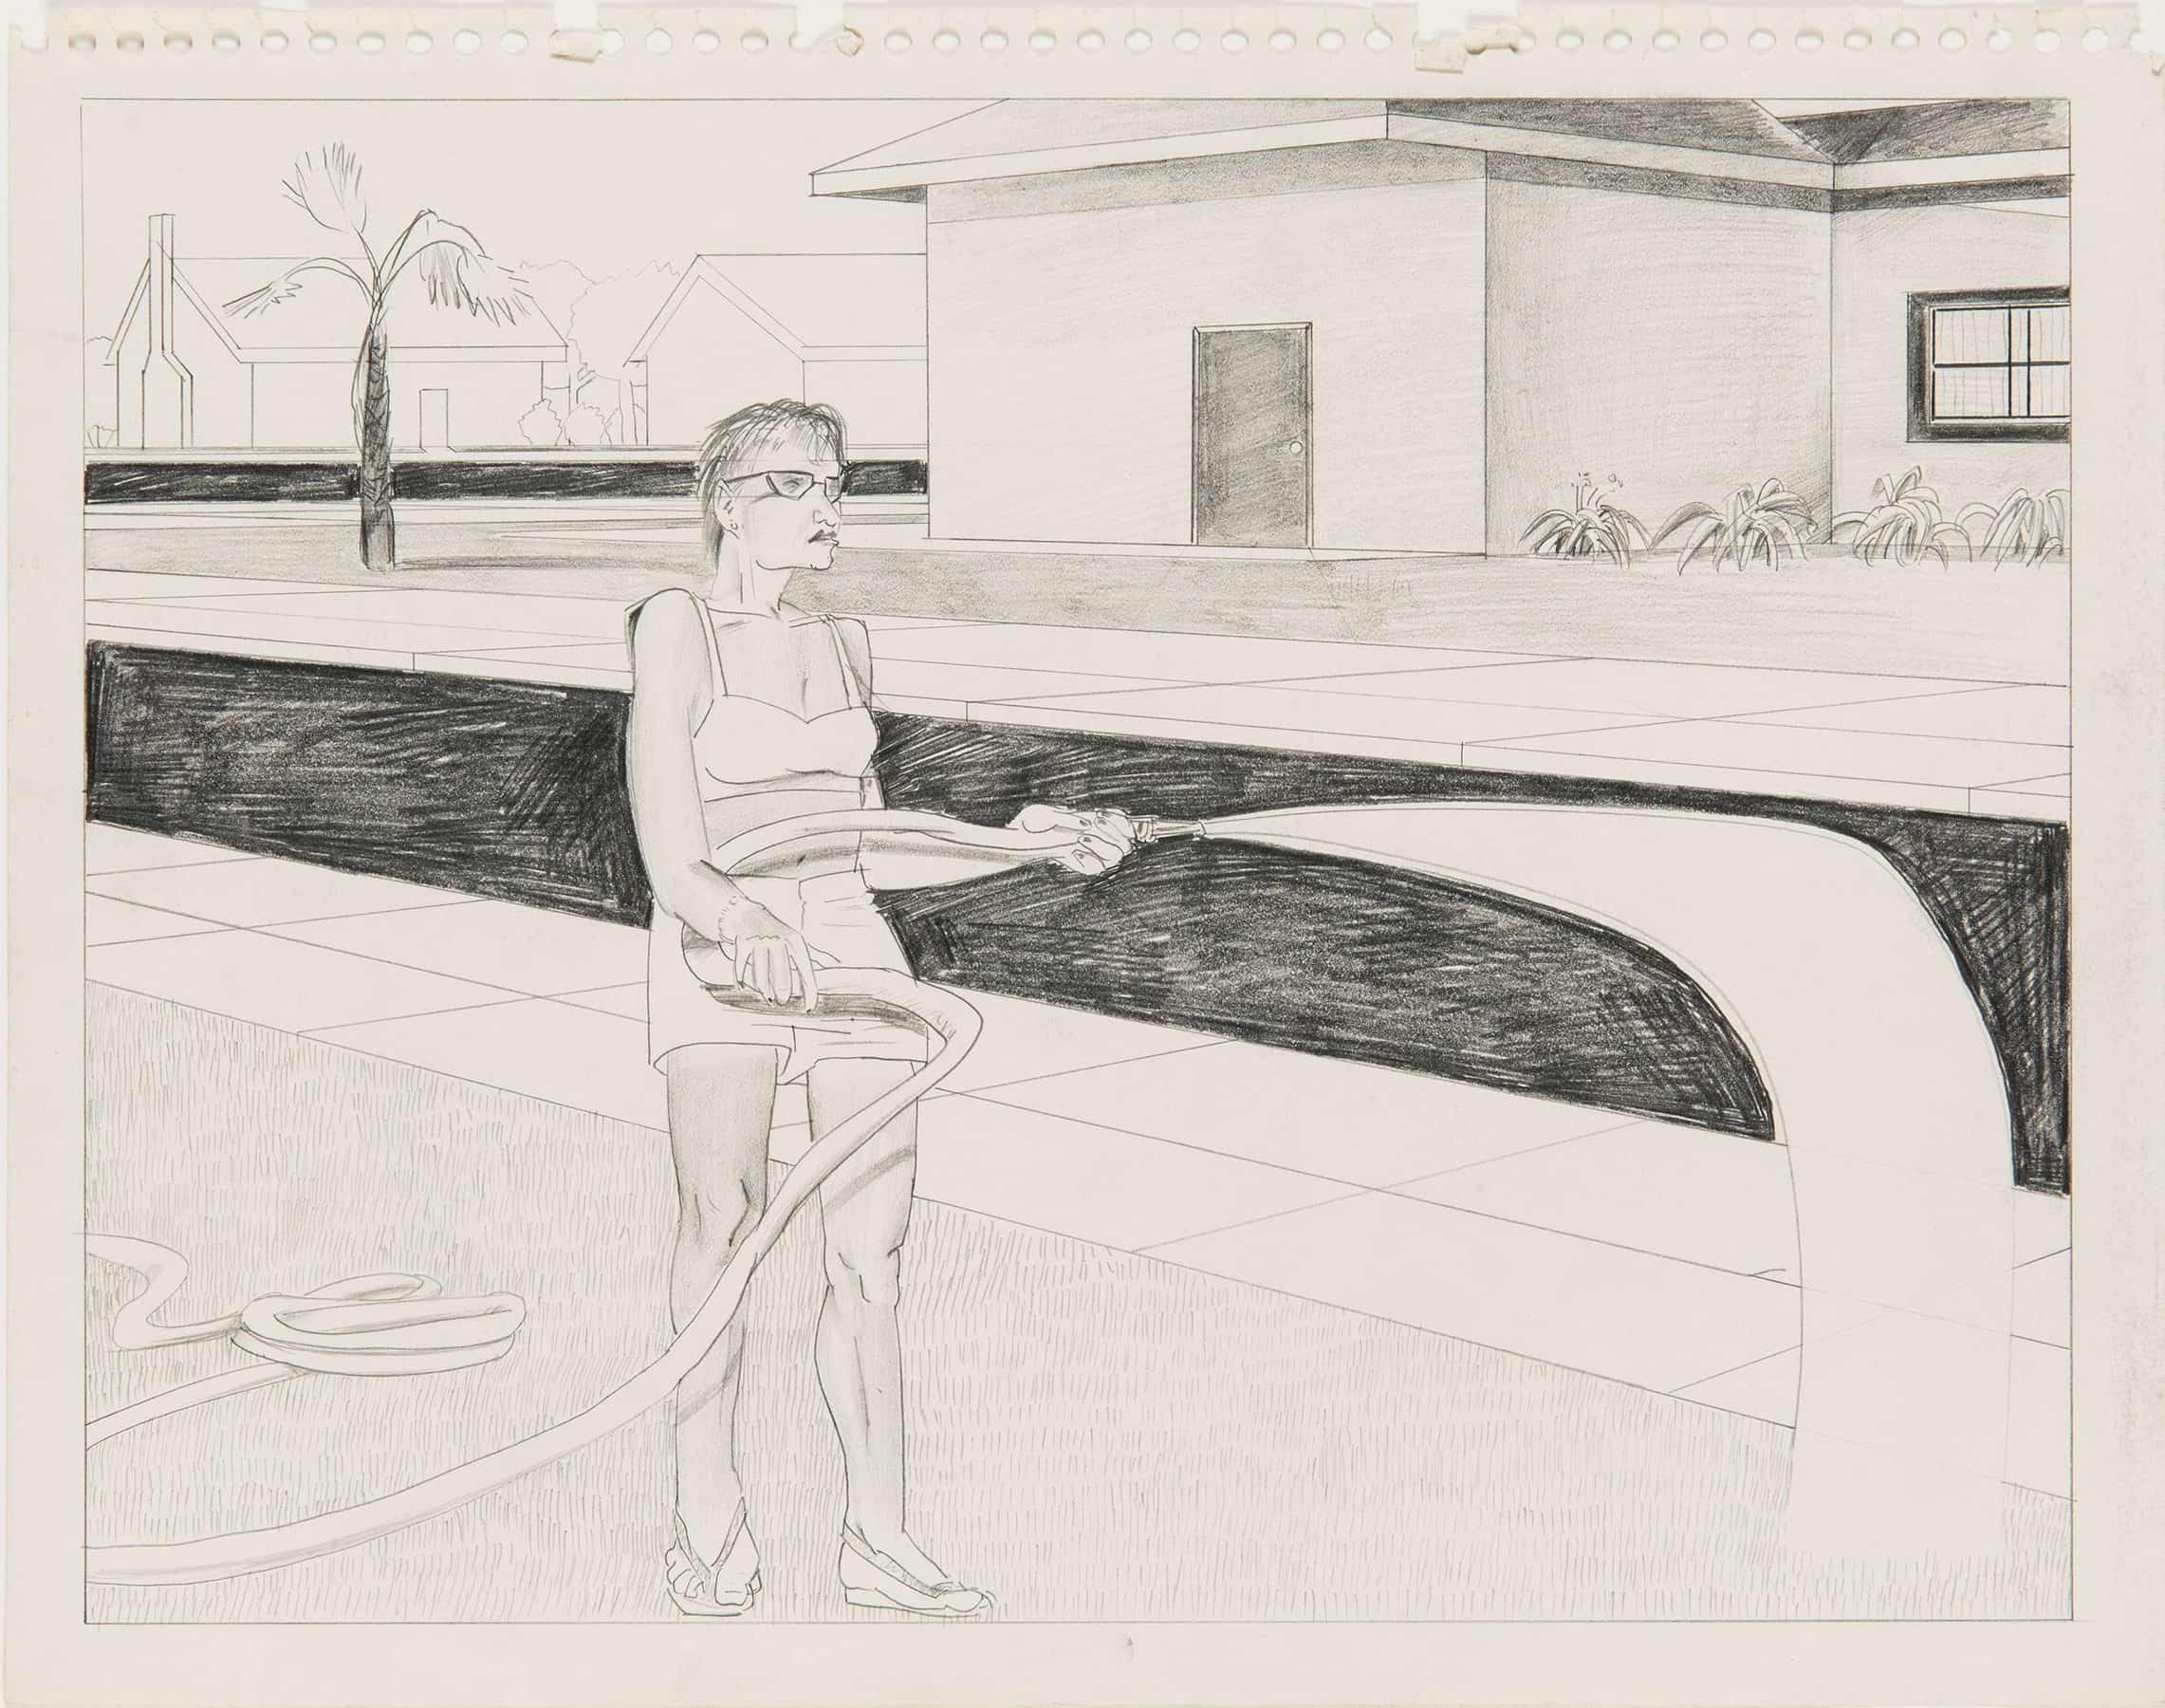 Patrick Angus | untitled | pencil on paper | cm. 27.5 x 35.5 © Estate of Patrick Angus